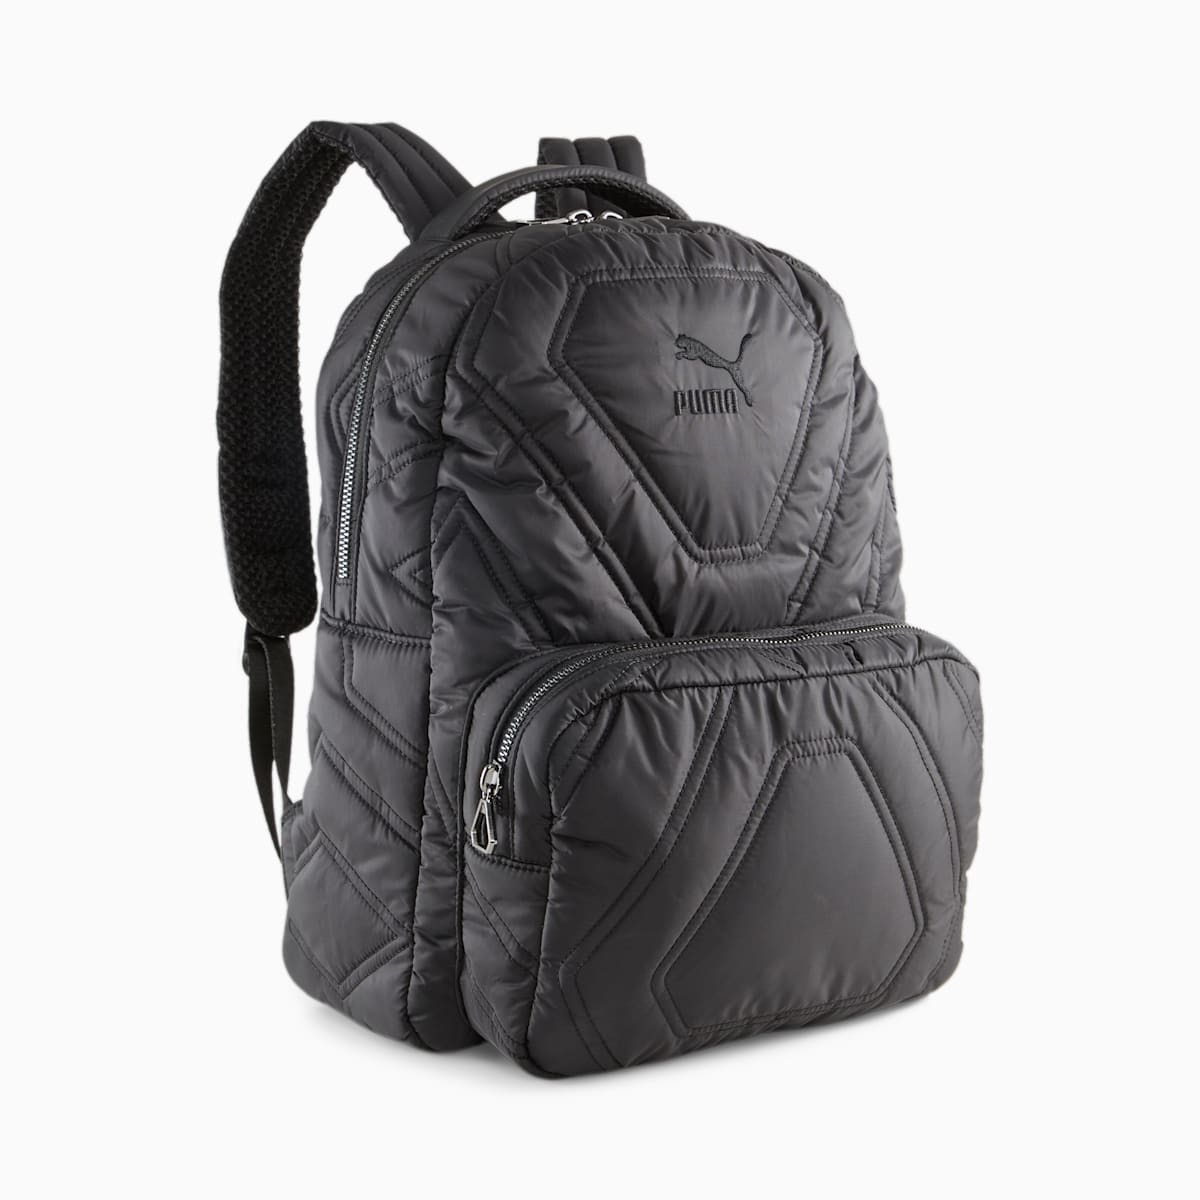 LUXE SPORT Backpack